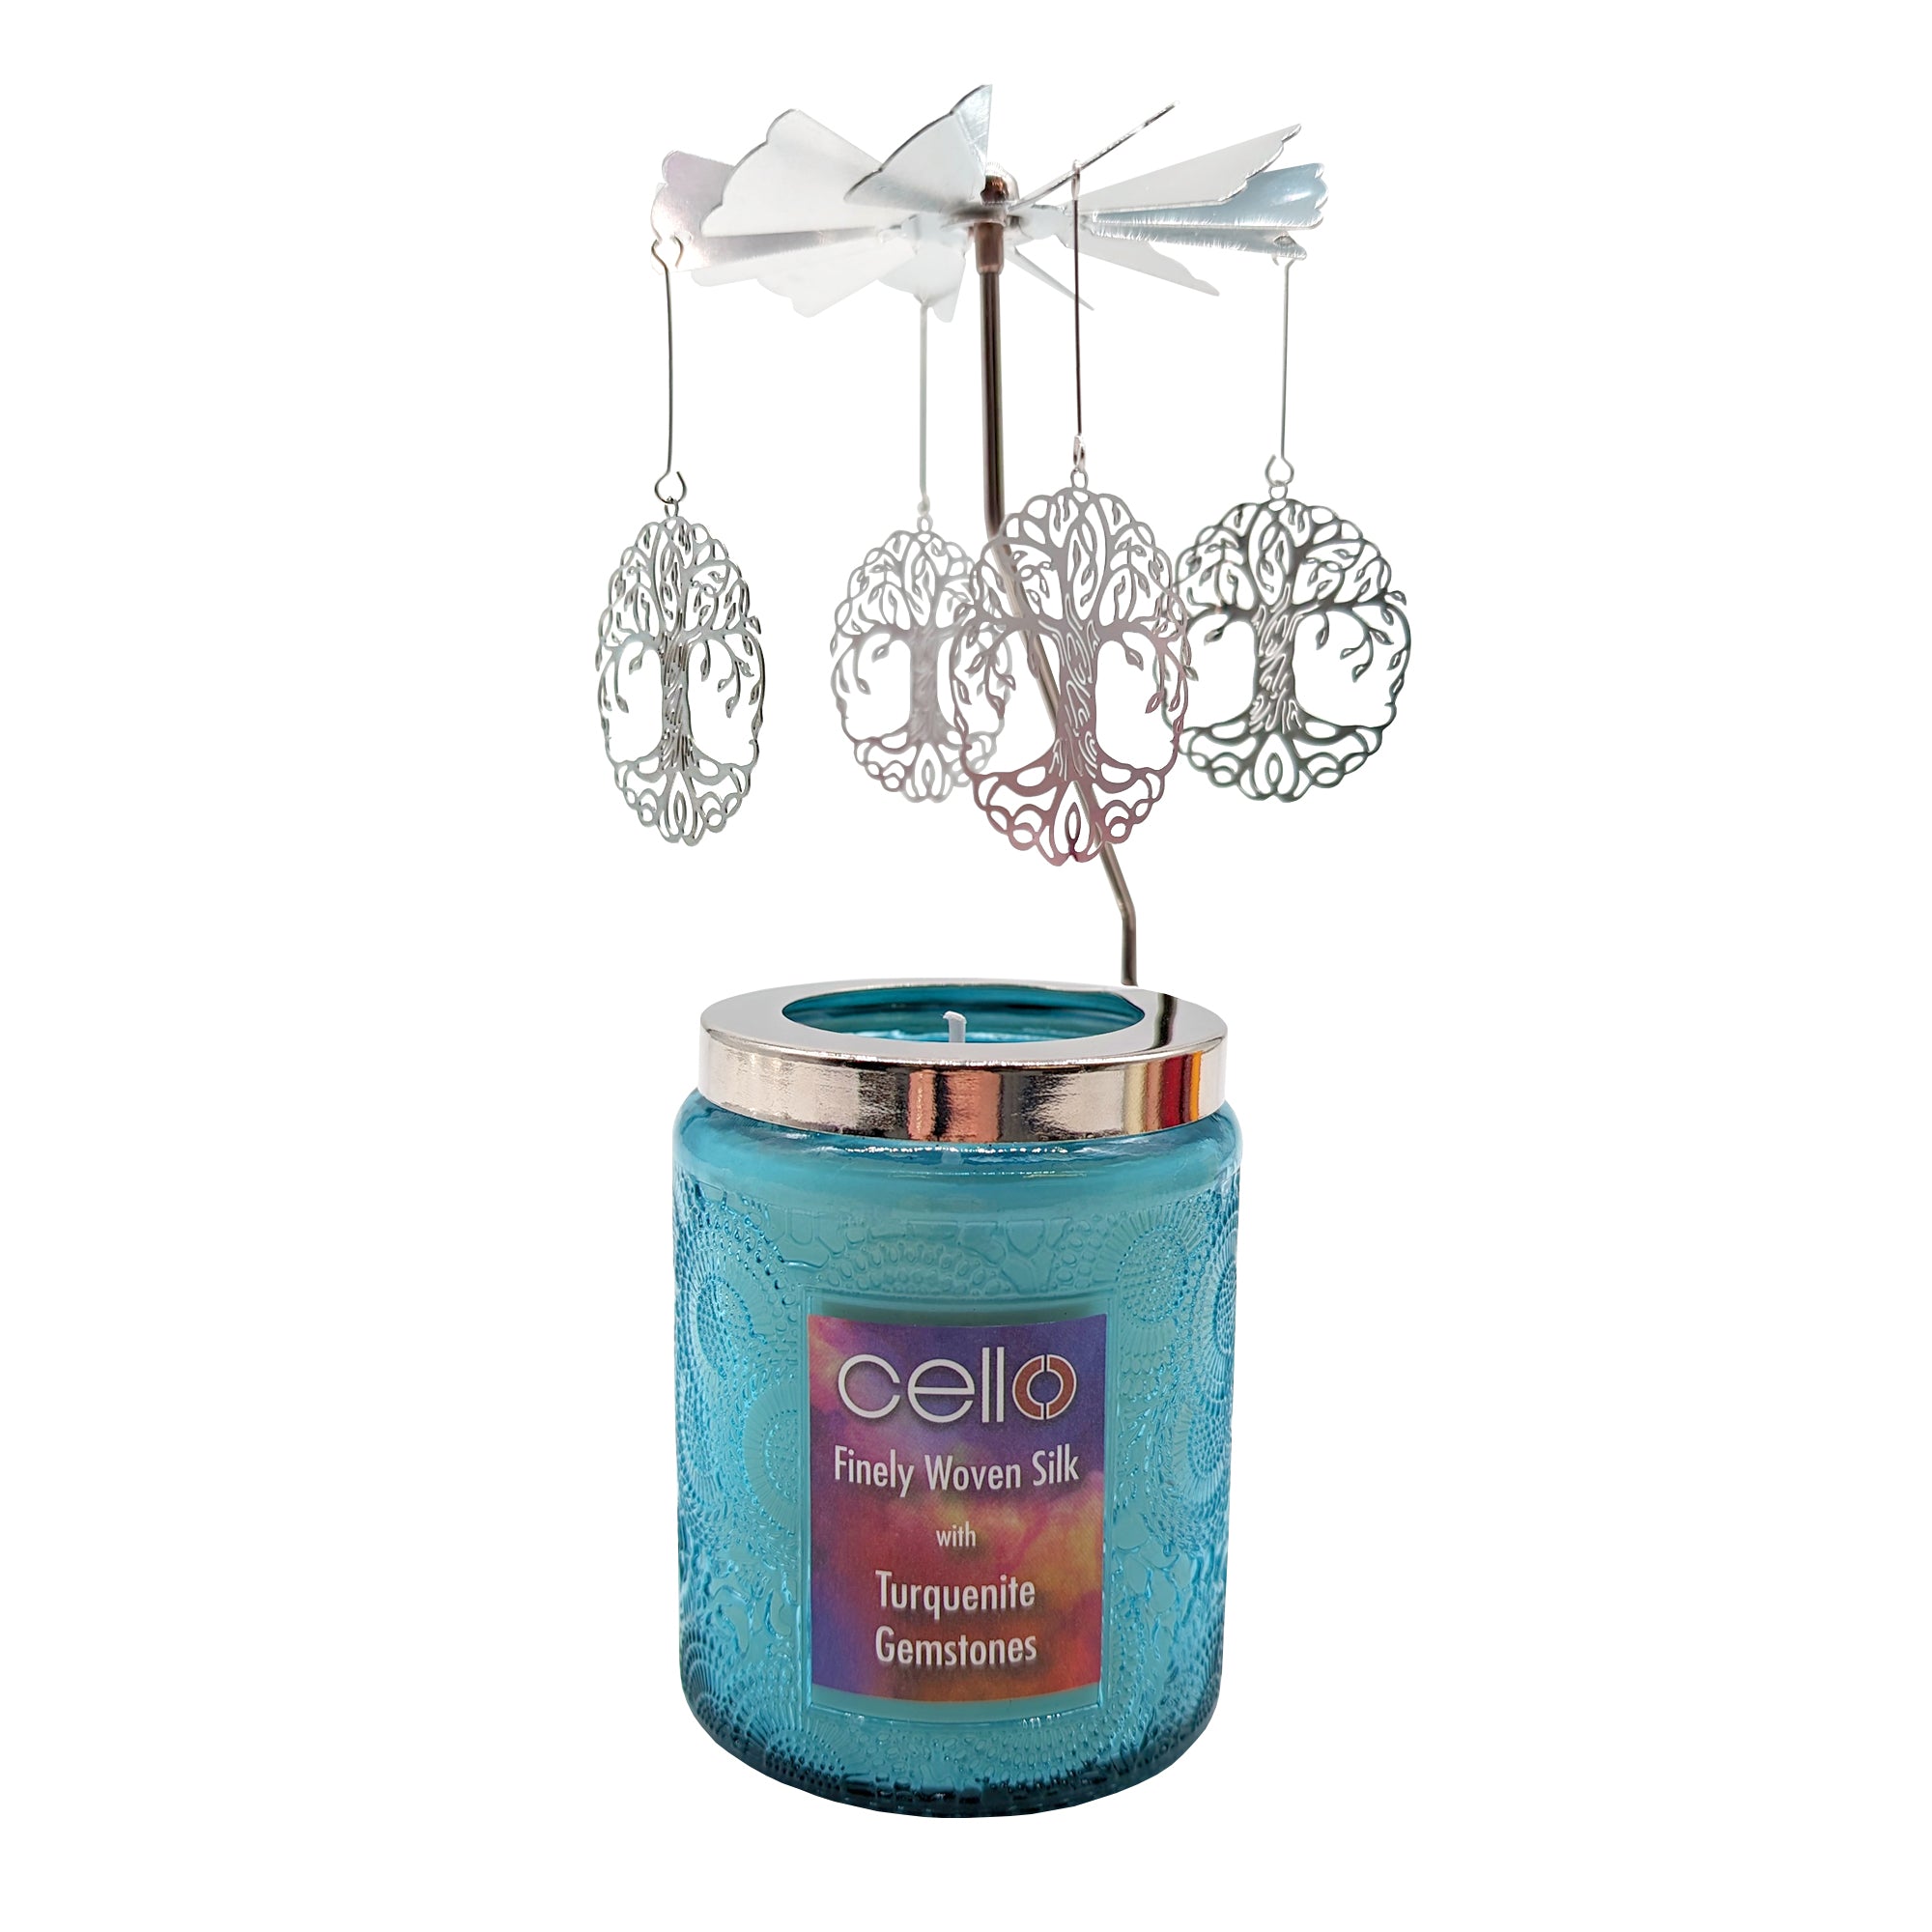 Cello - Gemstone Candle 200g with Convection Spinner - Finely Woven Silk with Turquenite